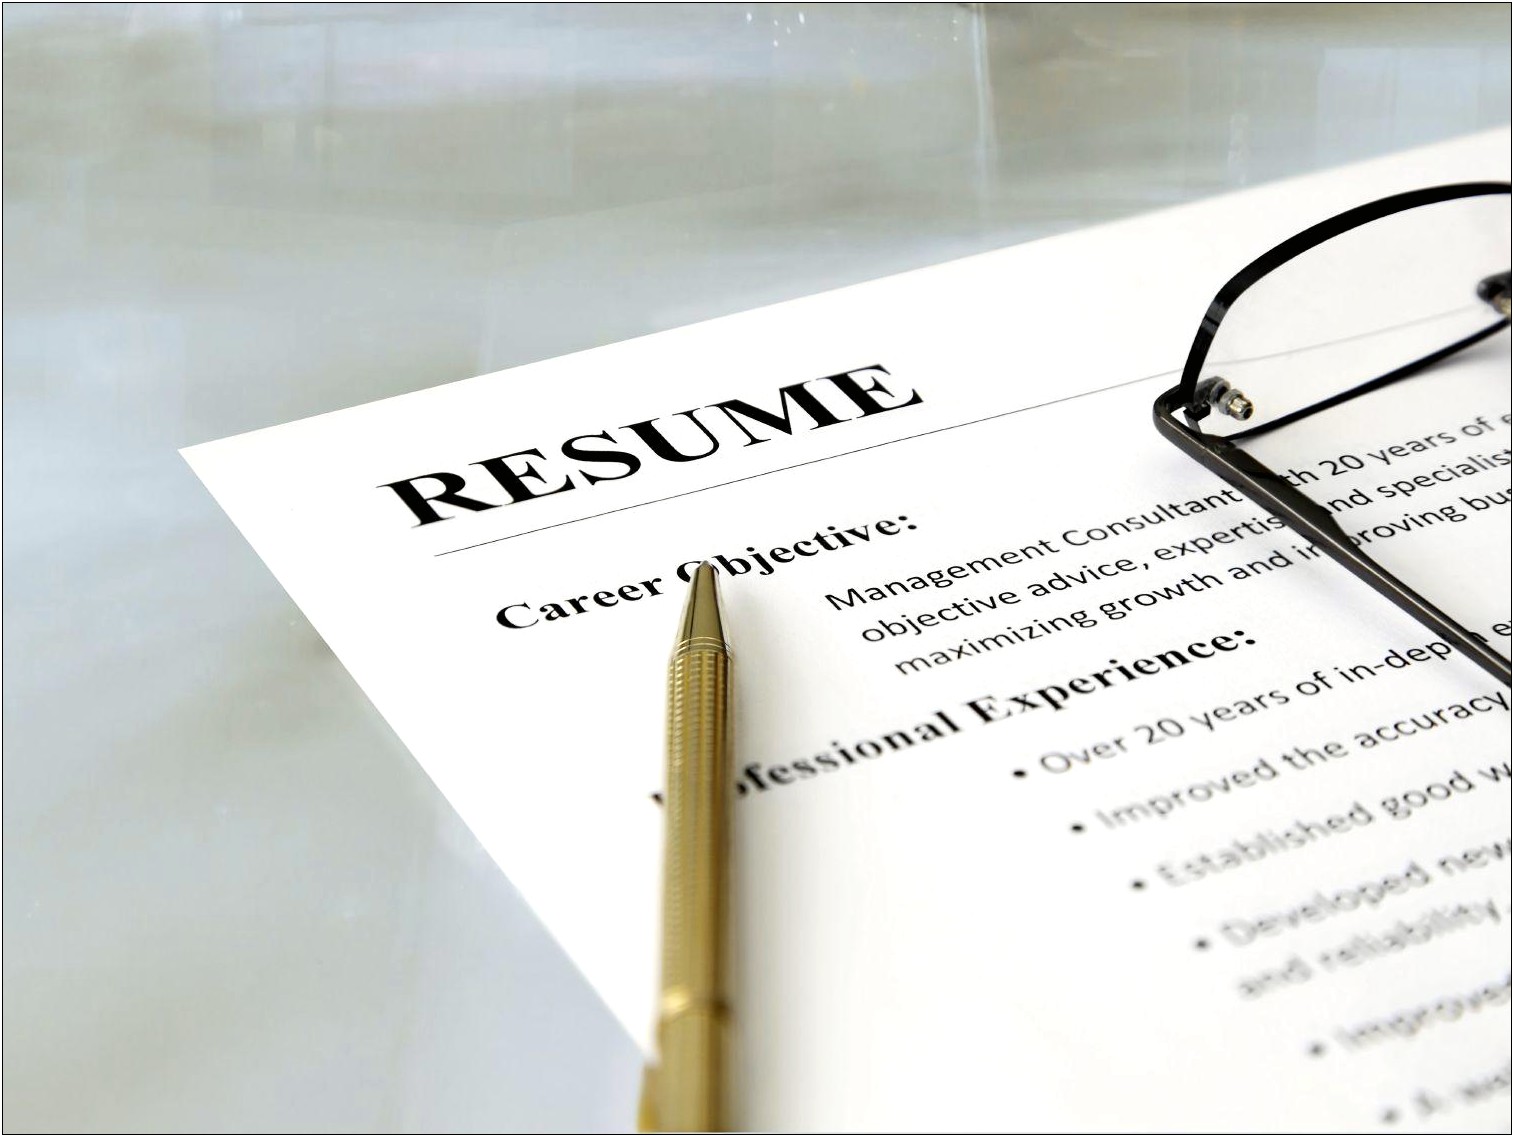 Top Of Resumes Other Than Objectives